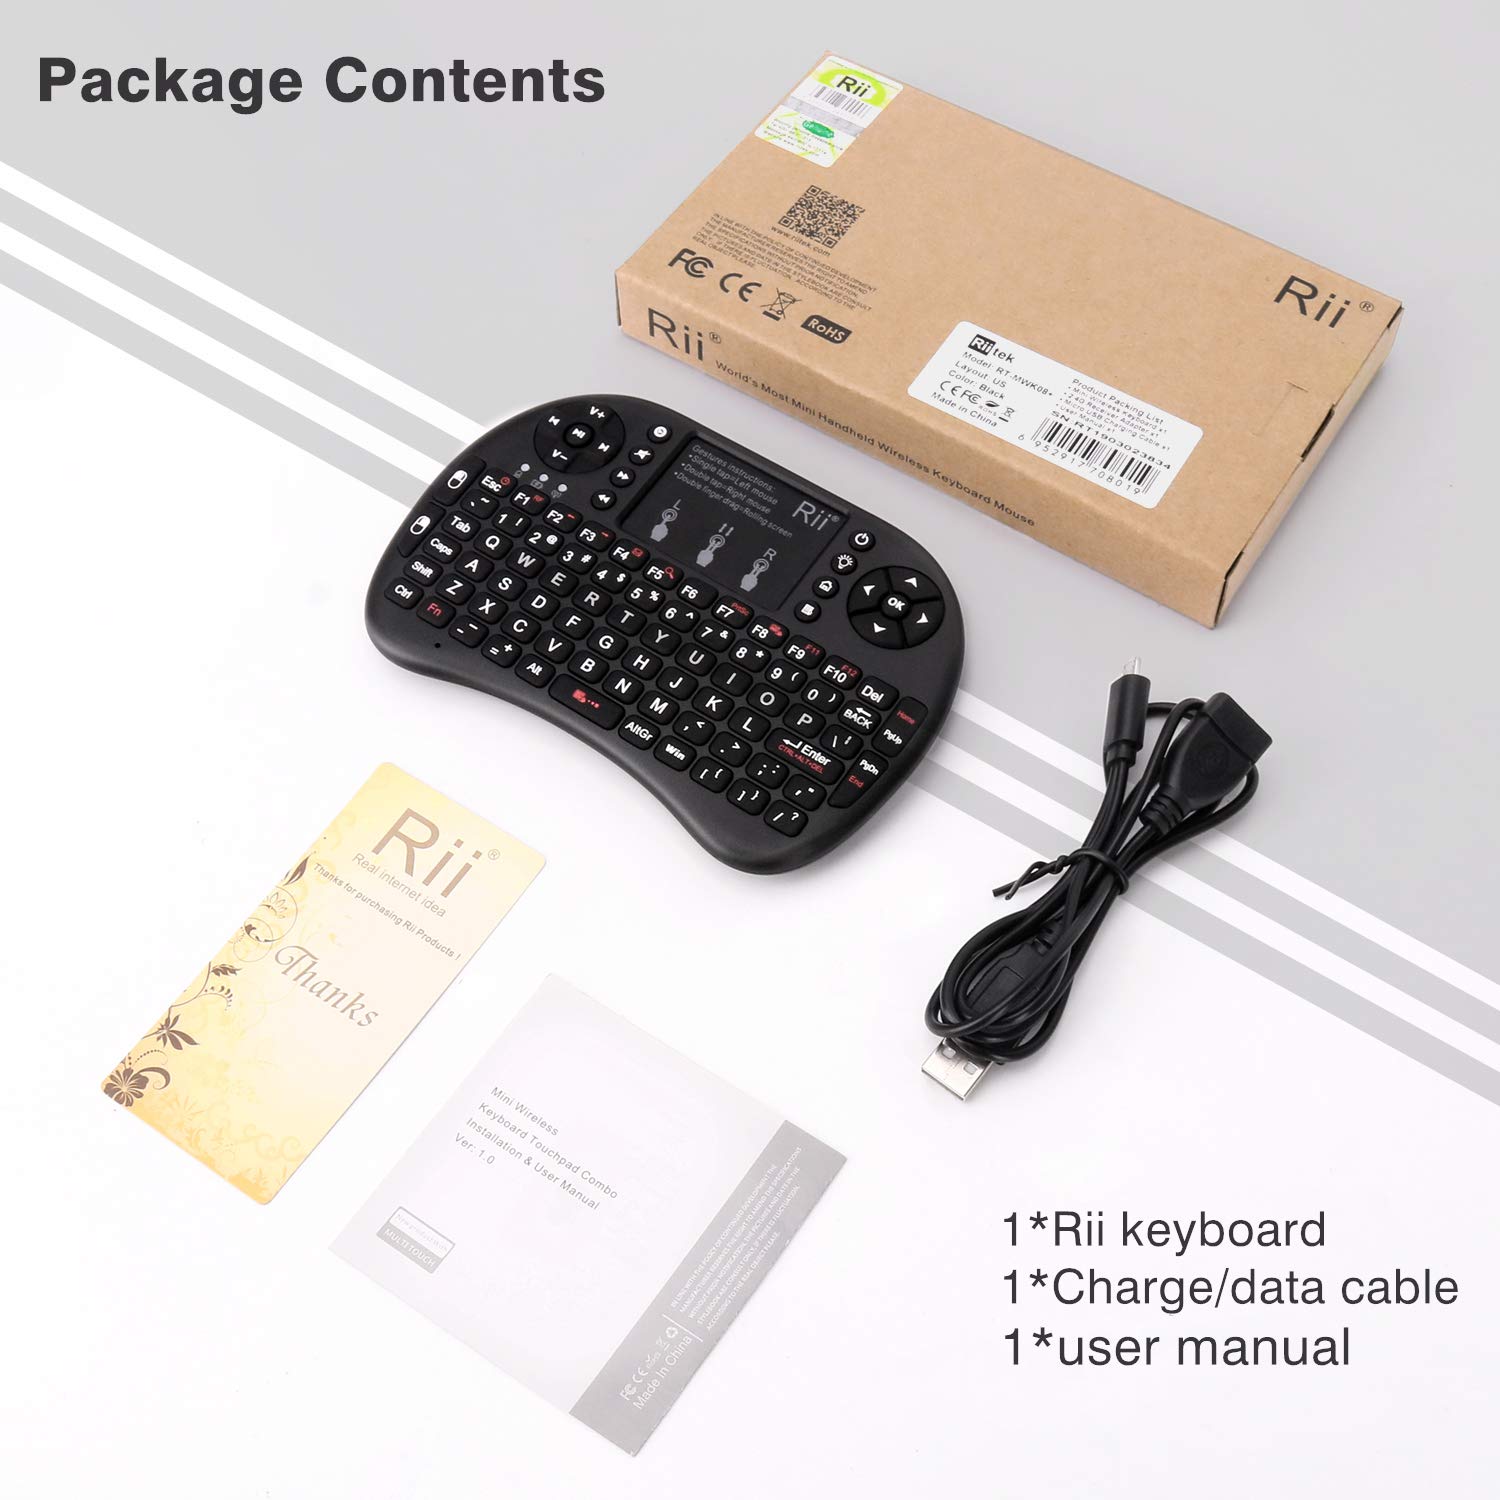 Rii i8 Mini Bluetooth Keyboard with Touchpad＆QWERTY Keyboard, Portable Wireless Keyboard with Remote Control for Smartphones /laptop/PC/Tablets/ Windows/Mac/ TV/Xbox/PS3/Raspberry Pi .Black